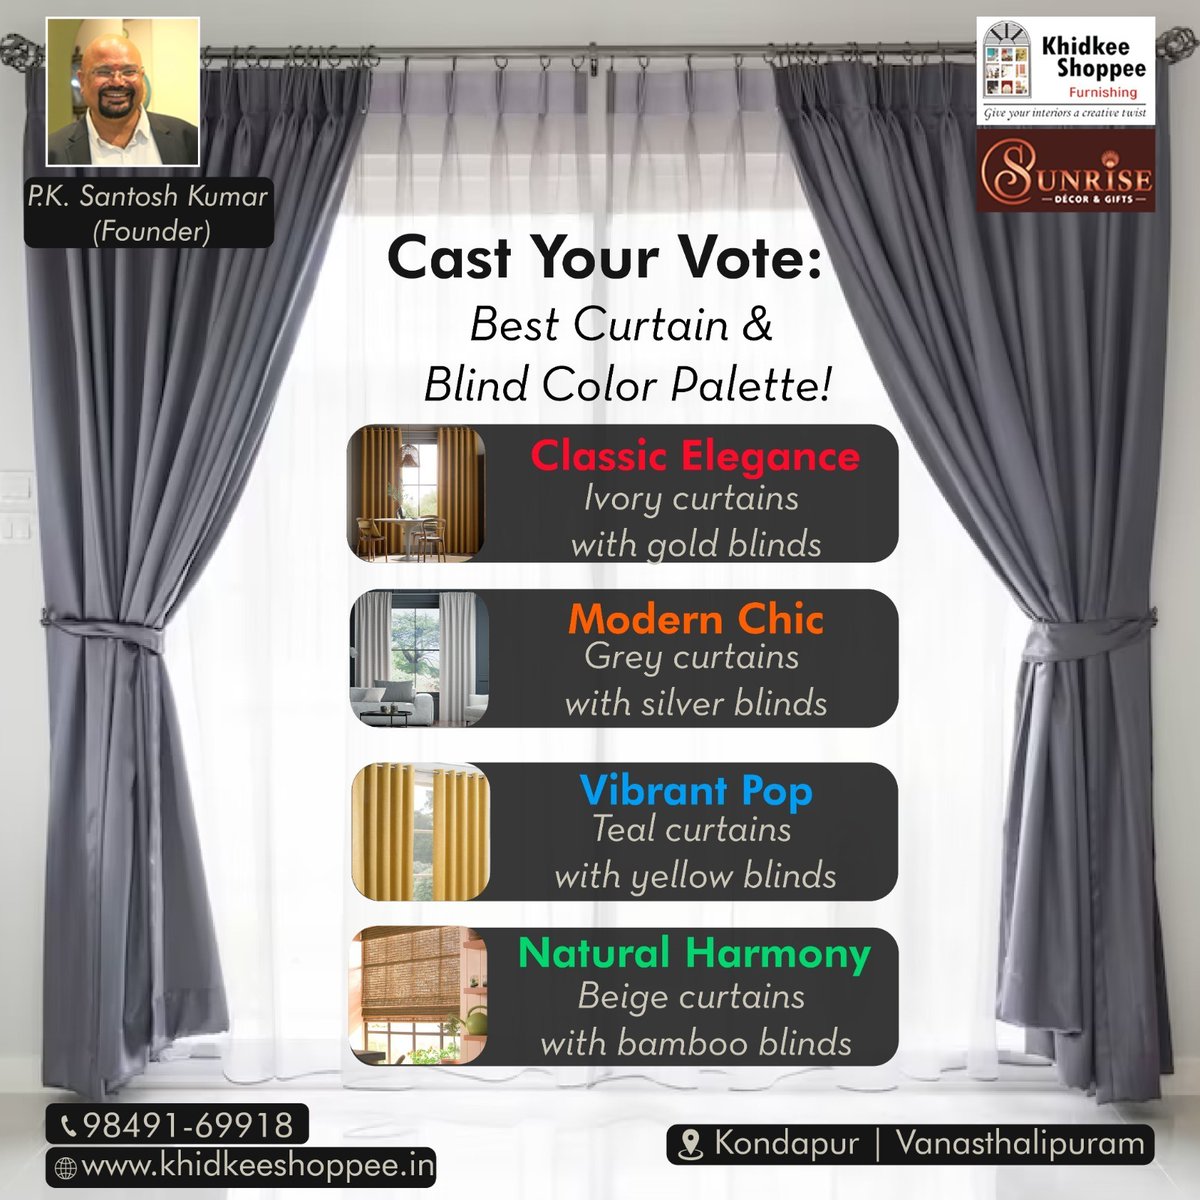 Which color palette wins your heart? Cast your vote and let your windows speak volumes!
#KhidkeeShoppee #homedecor #homefurnishingstore #HomeDecorInspo #WindowMakeover #TransformYourSpace #HomeStyling #WindowFashion #VoteNow #curtains #govote #curtainsdesign #Hyderabad